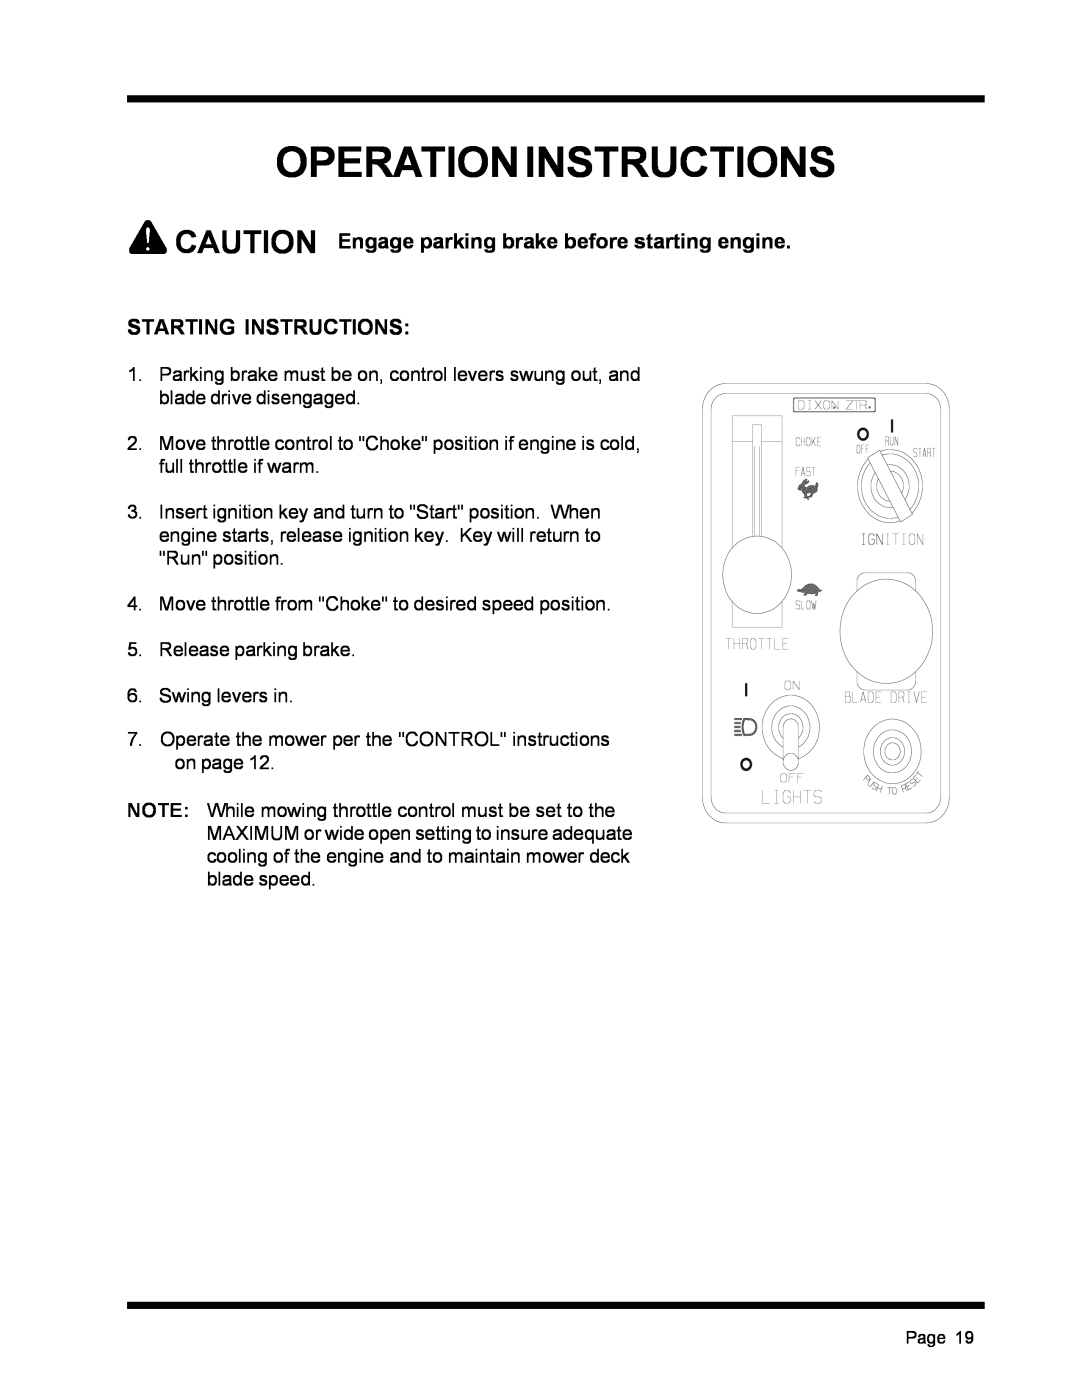 Dixon ZTR 4516K manual Operation Instructions, CAUTION Engage parking brake before starting engine, Starting Instructions 